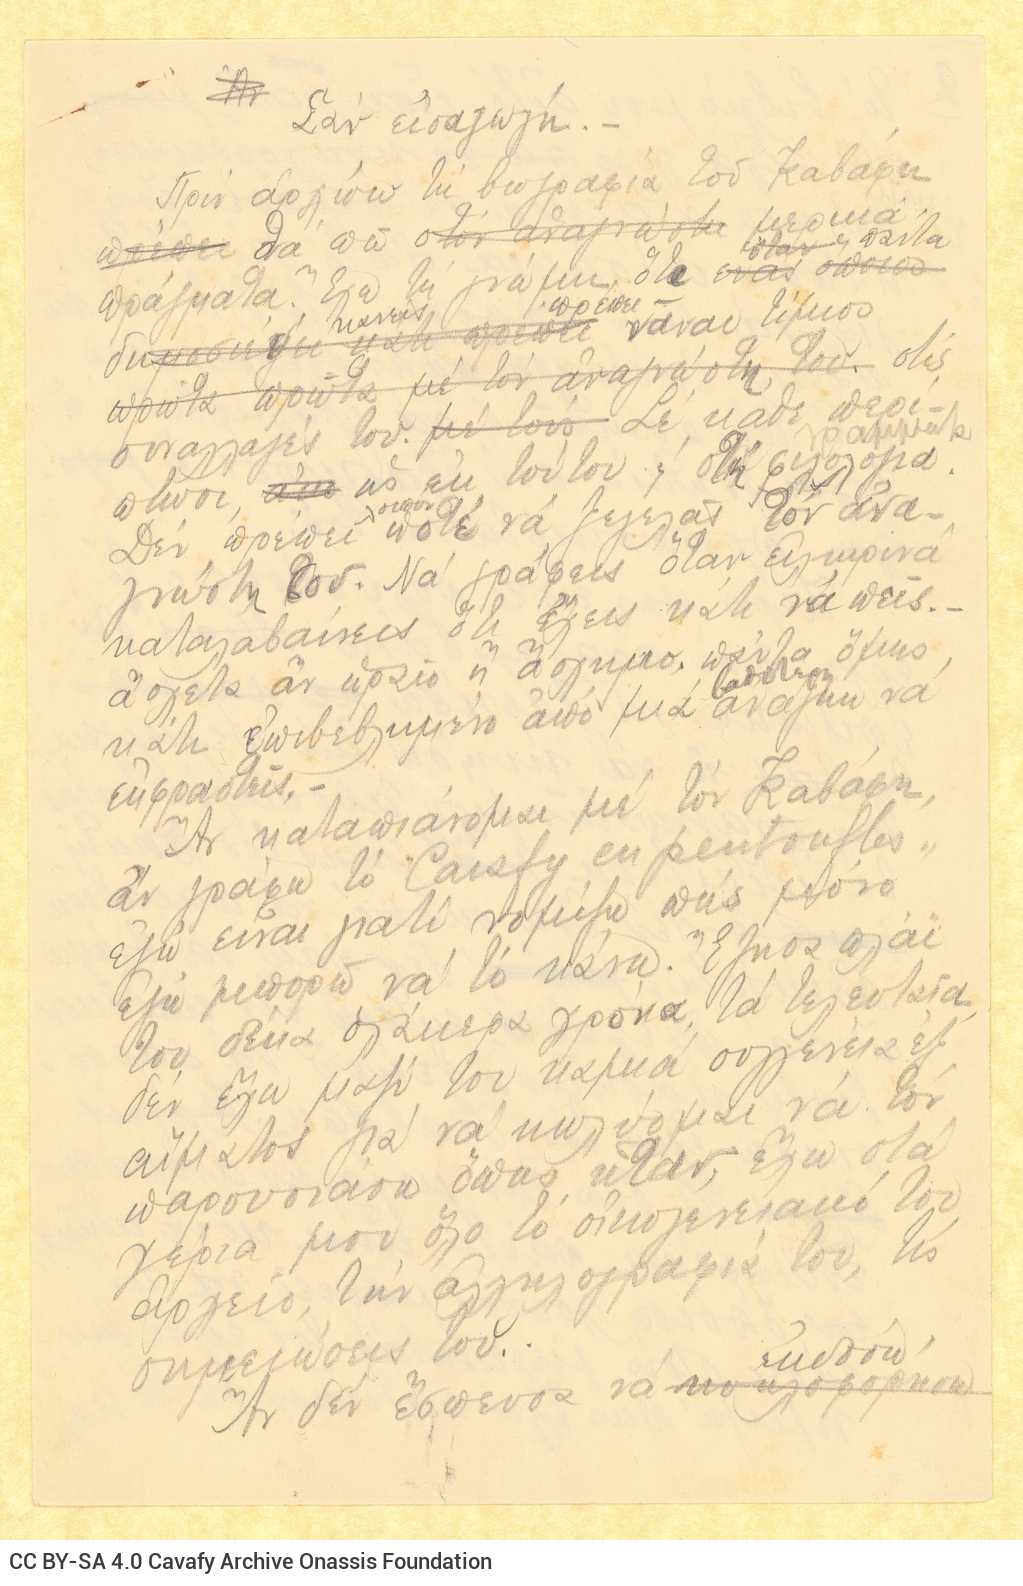 Handwritten notes by Rica Singopoulo on both sides of a sheet and on the recto of a second sheet, the verso of which is blank